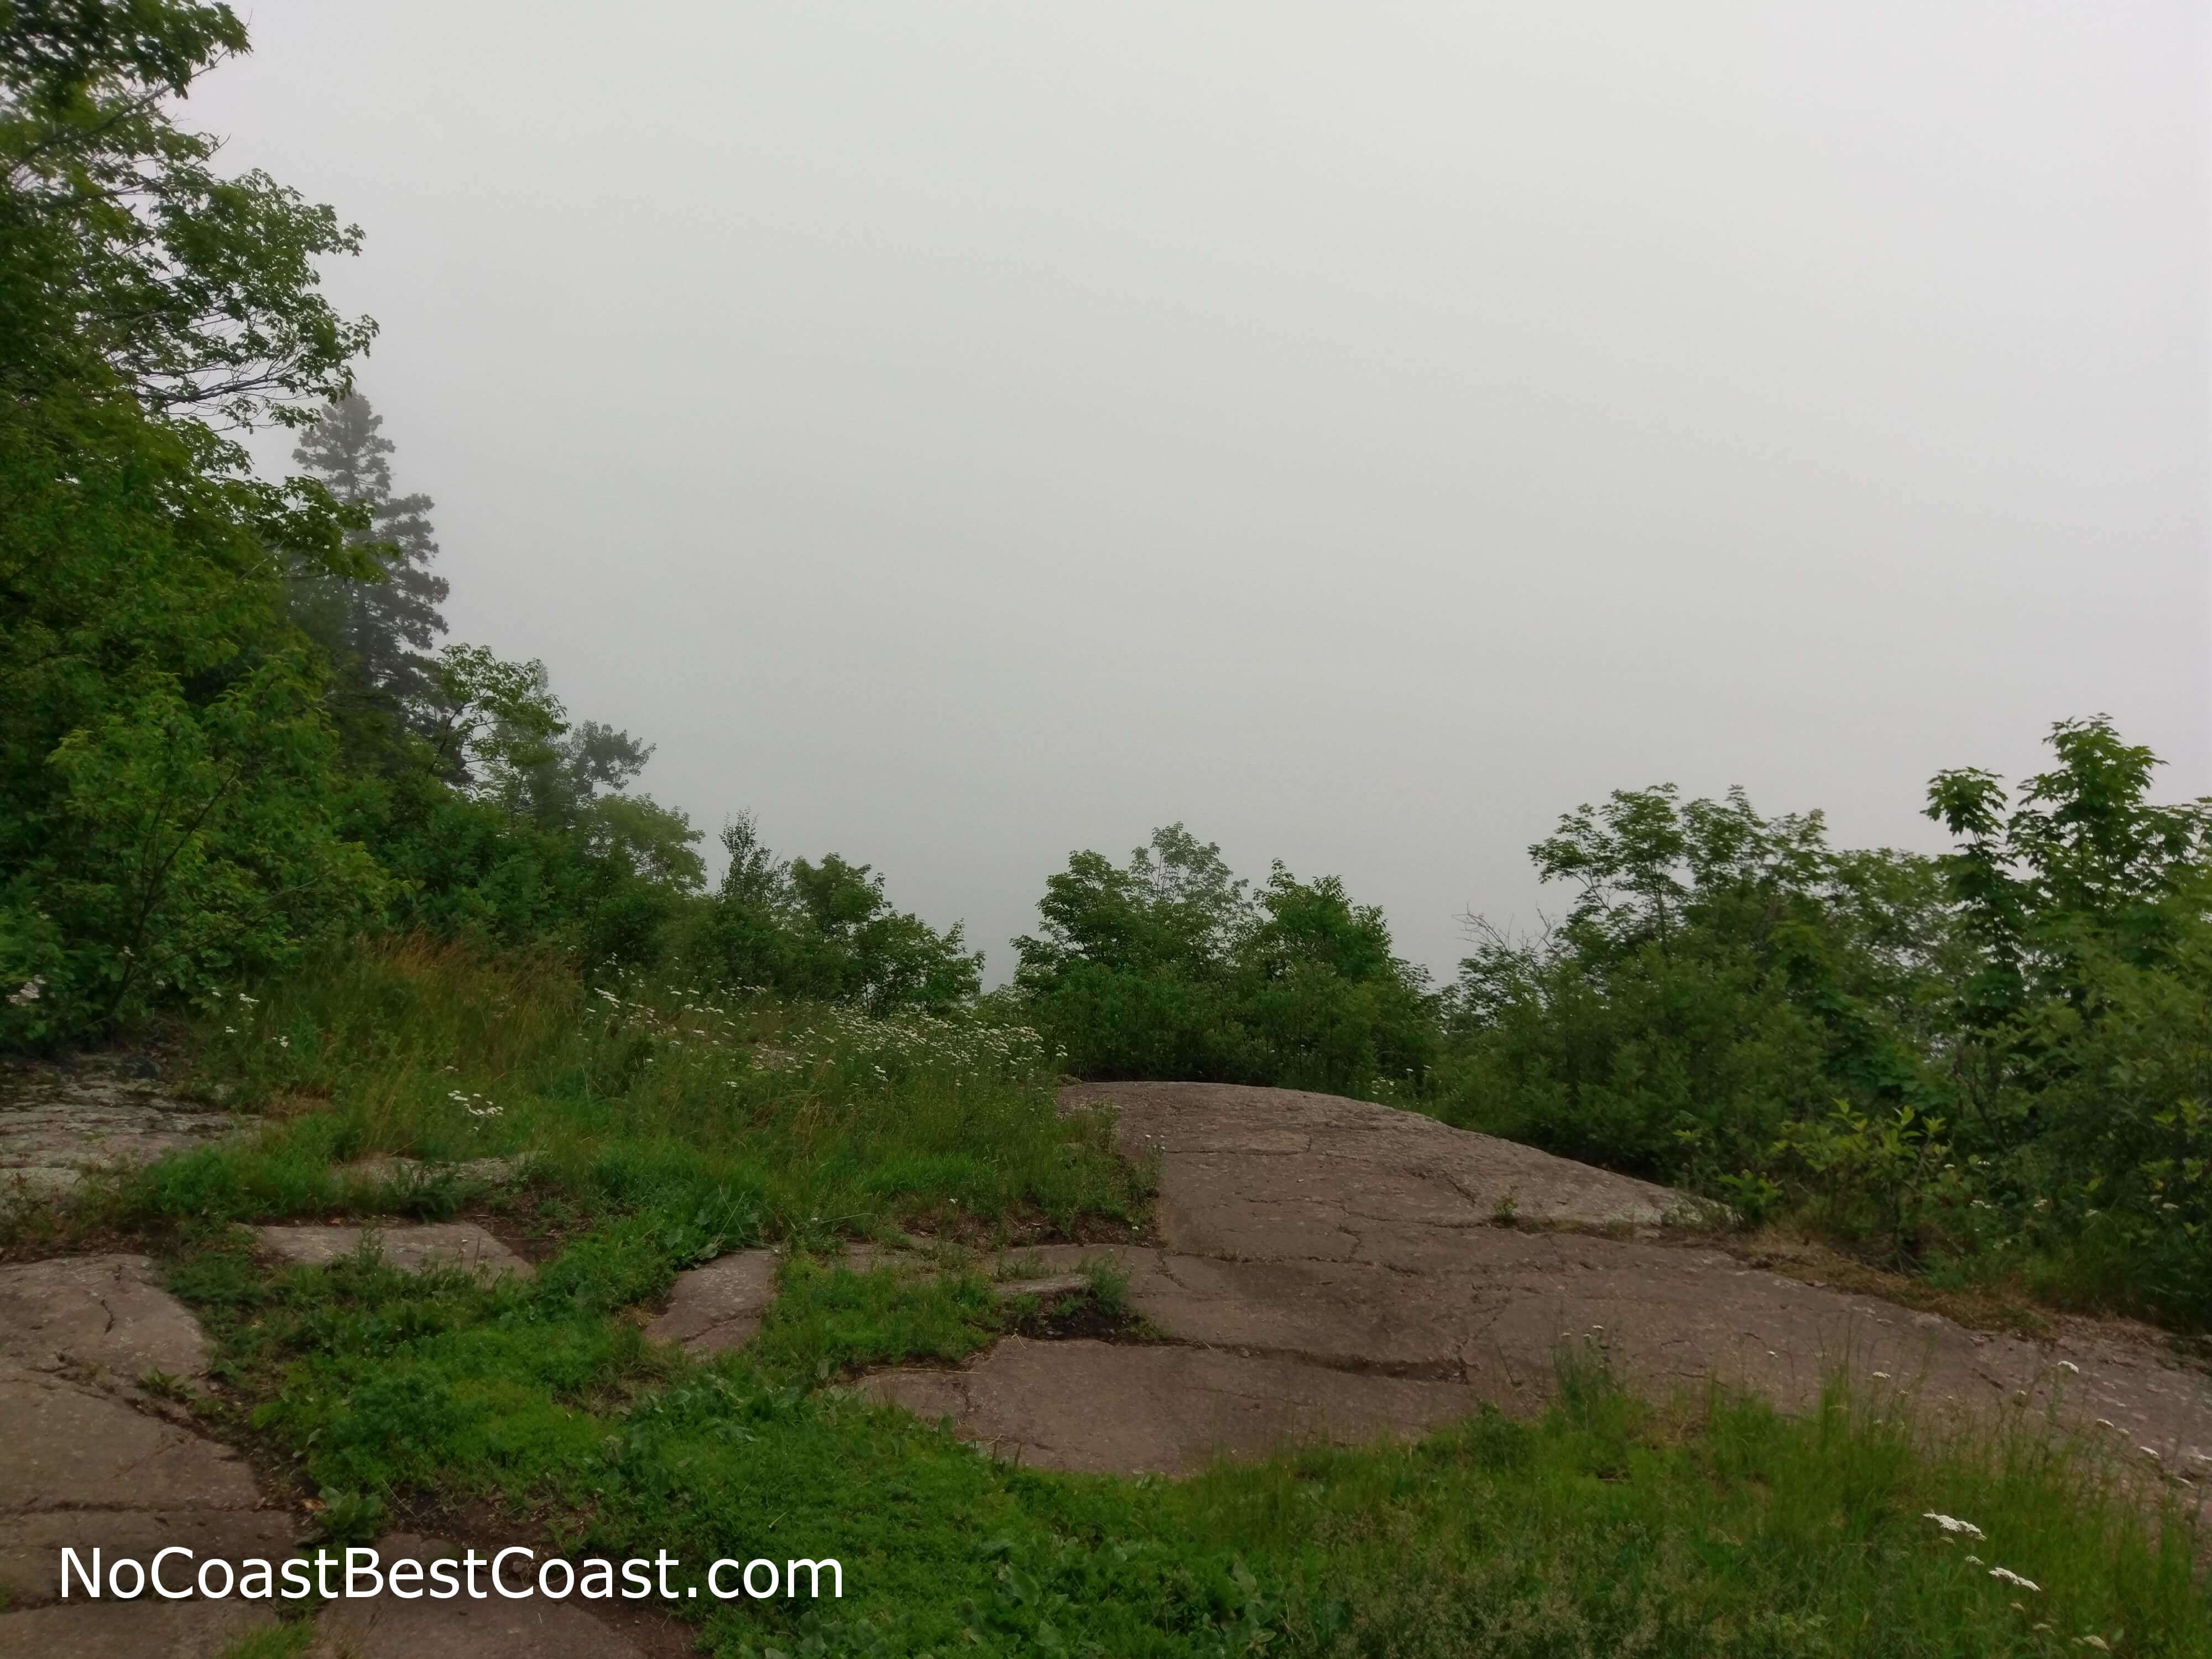 A rocky overlook (probably) facing Lake Superior